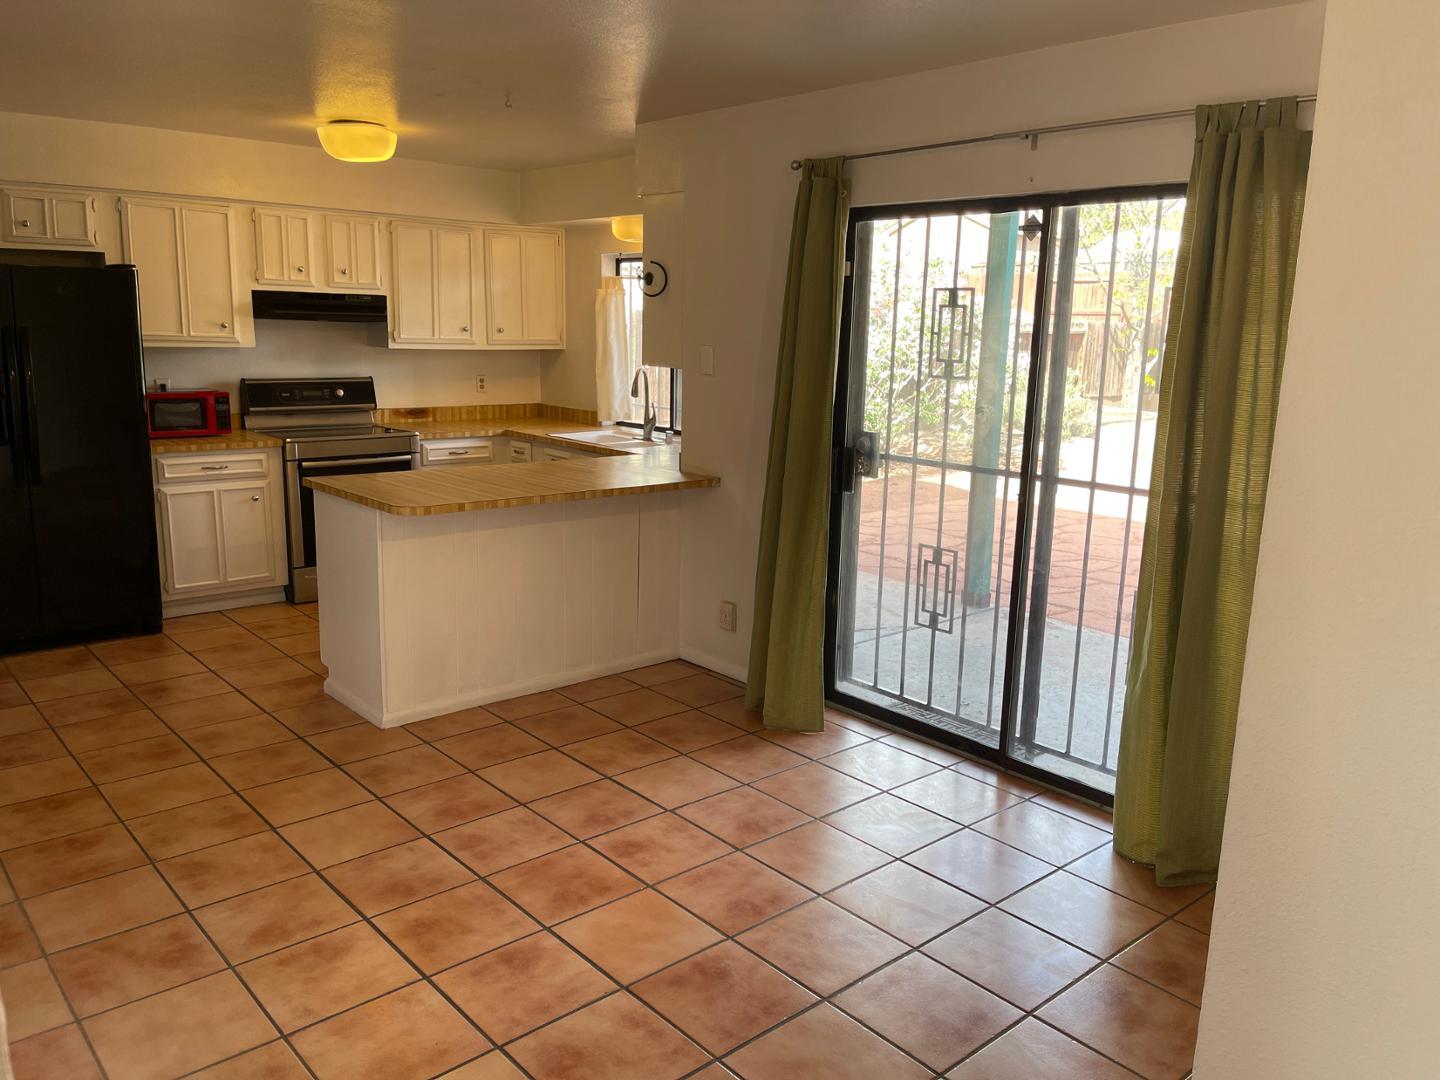 3808 Lafayette Drive, Albuquerque, New Mexico 87107, 3 Bedrooms Bedrooms, ,2 BathroomsBathrooms,Residential Lease,For Rent,3808 Lafayette Drive,1060787